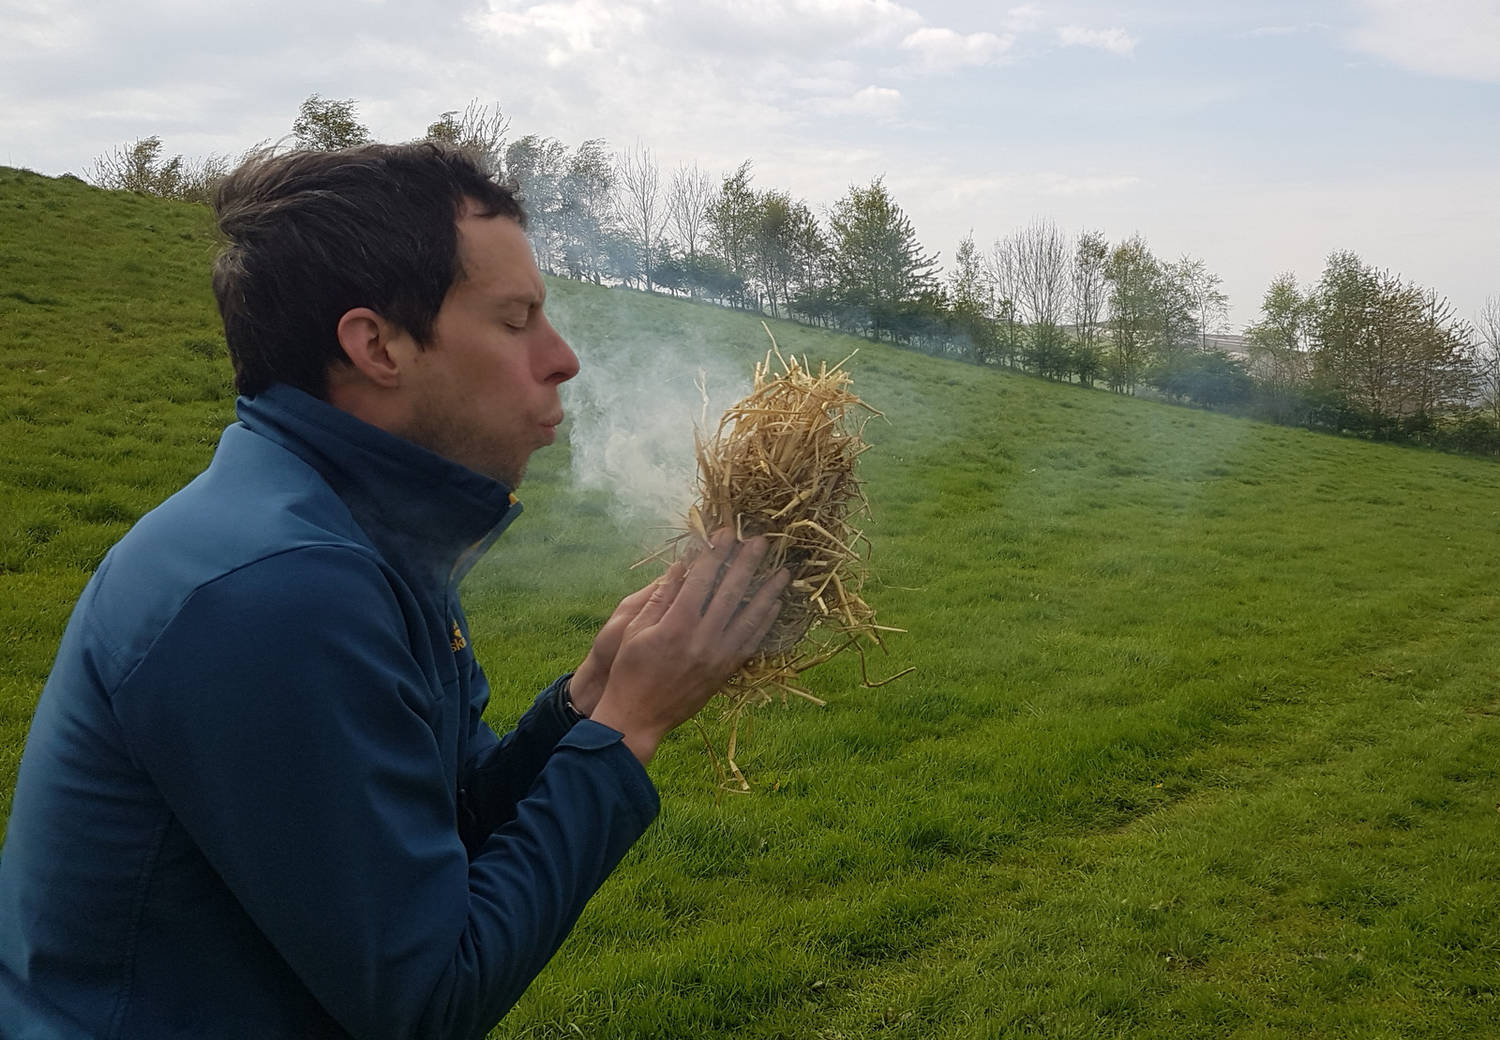 A photograph of a man blowing ona tinder bundle in a field.